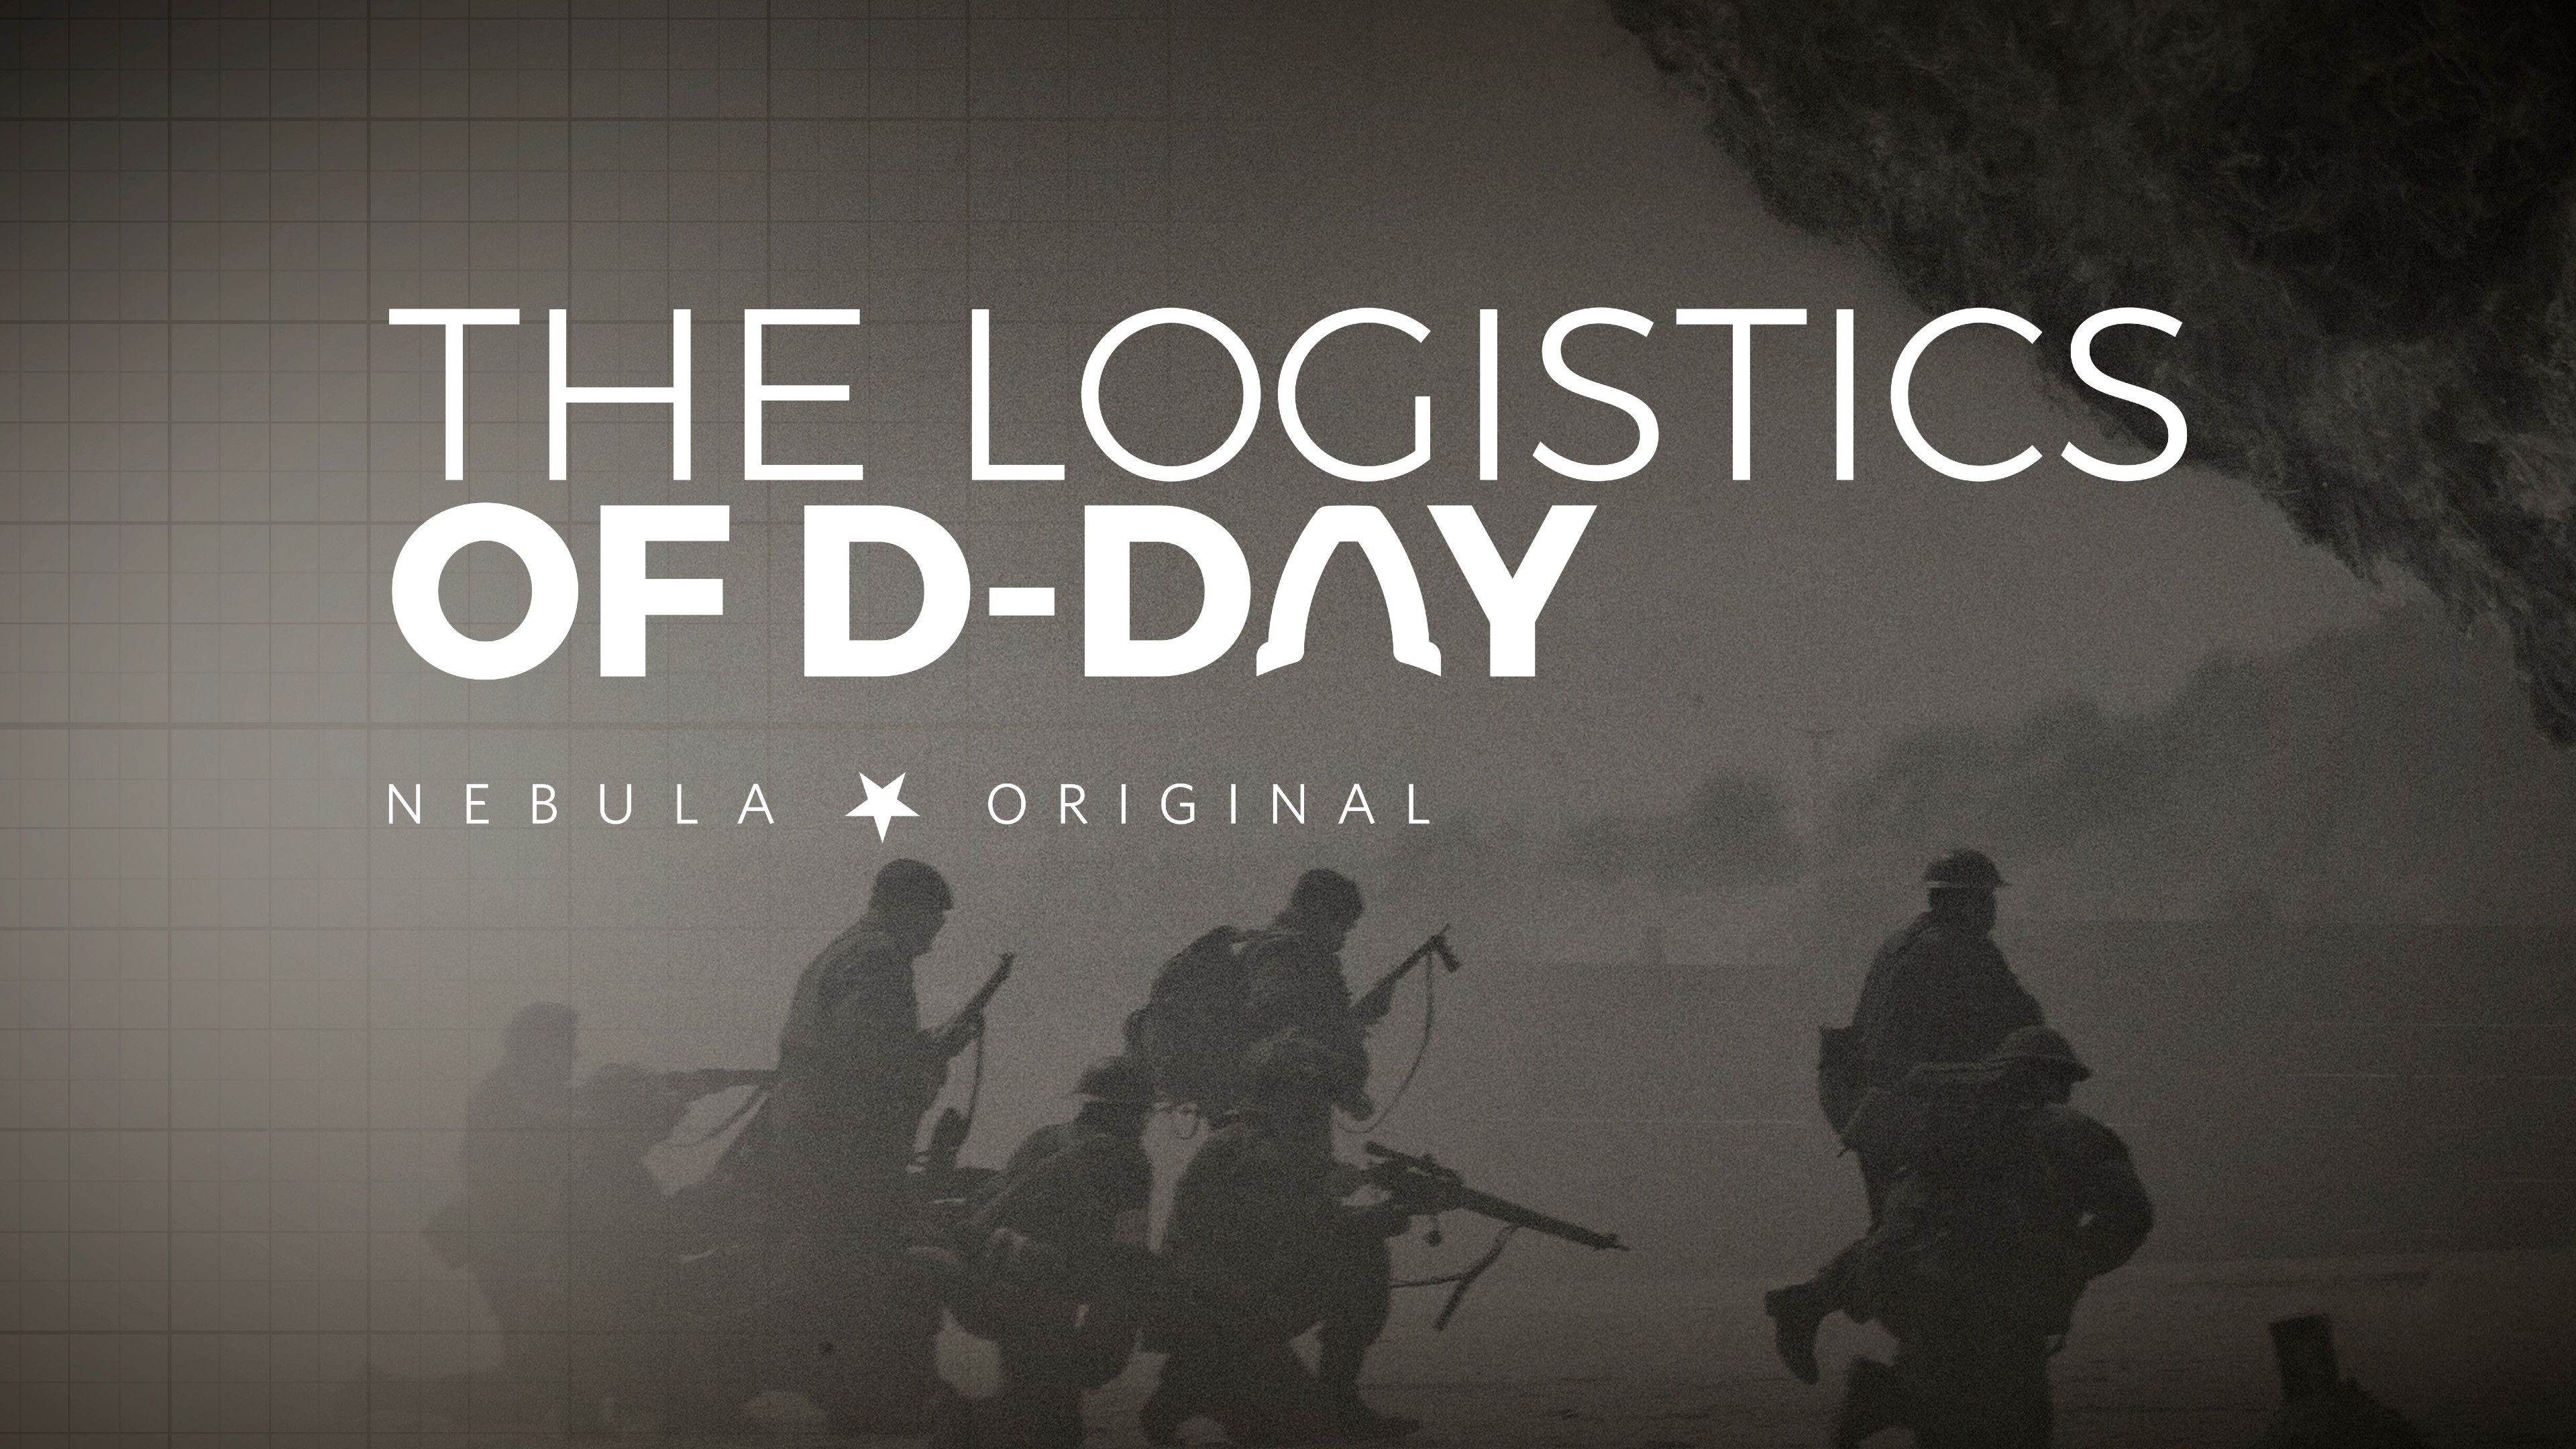 The Logistics of D-Day